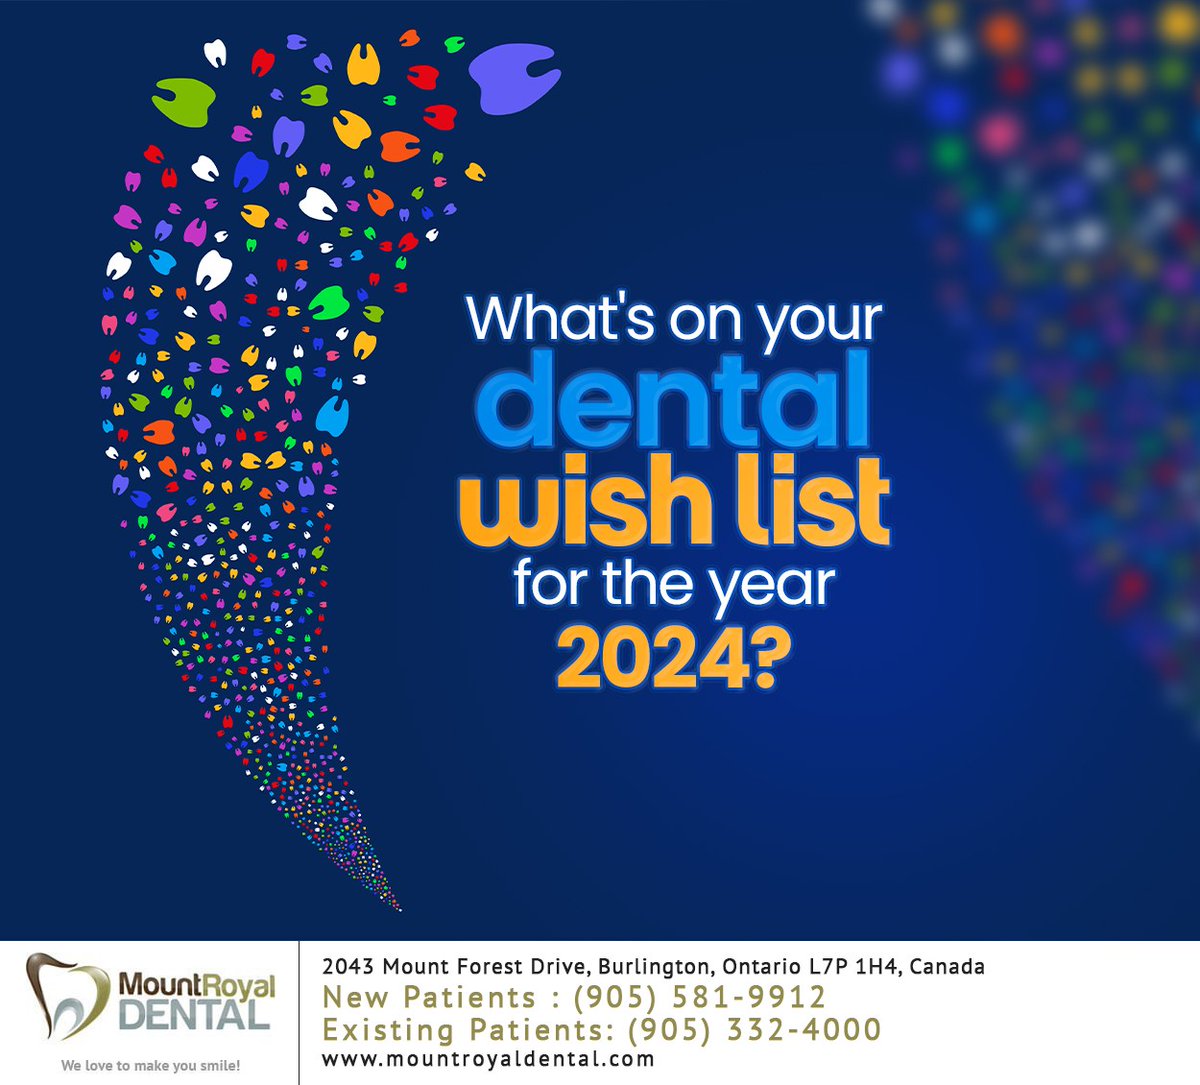 Mount Royal Dental offers a wide array of dental services to help you begin the new year with a new smile. Explore your options at mountroyaldental.com for a beautiful smile that radiates good health. #dentistry #dentalwishlist #burlington #ON #mountroyaldental